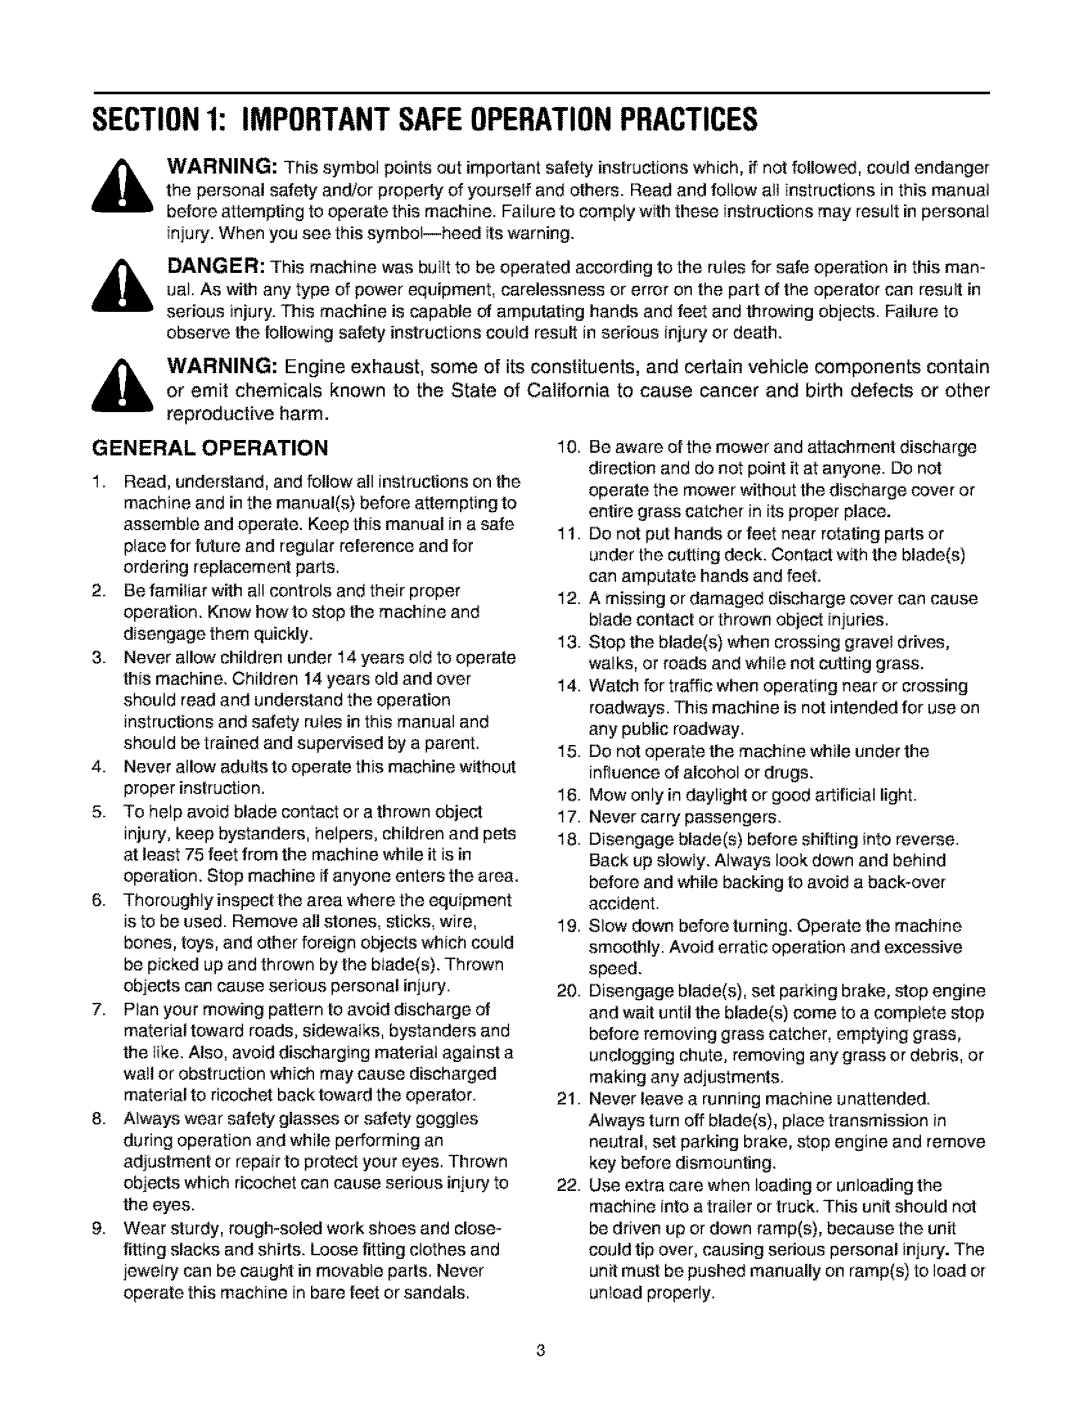 Bolens 660 manual Importantsafeoperationpractices, General Operation 